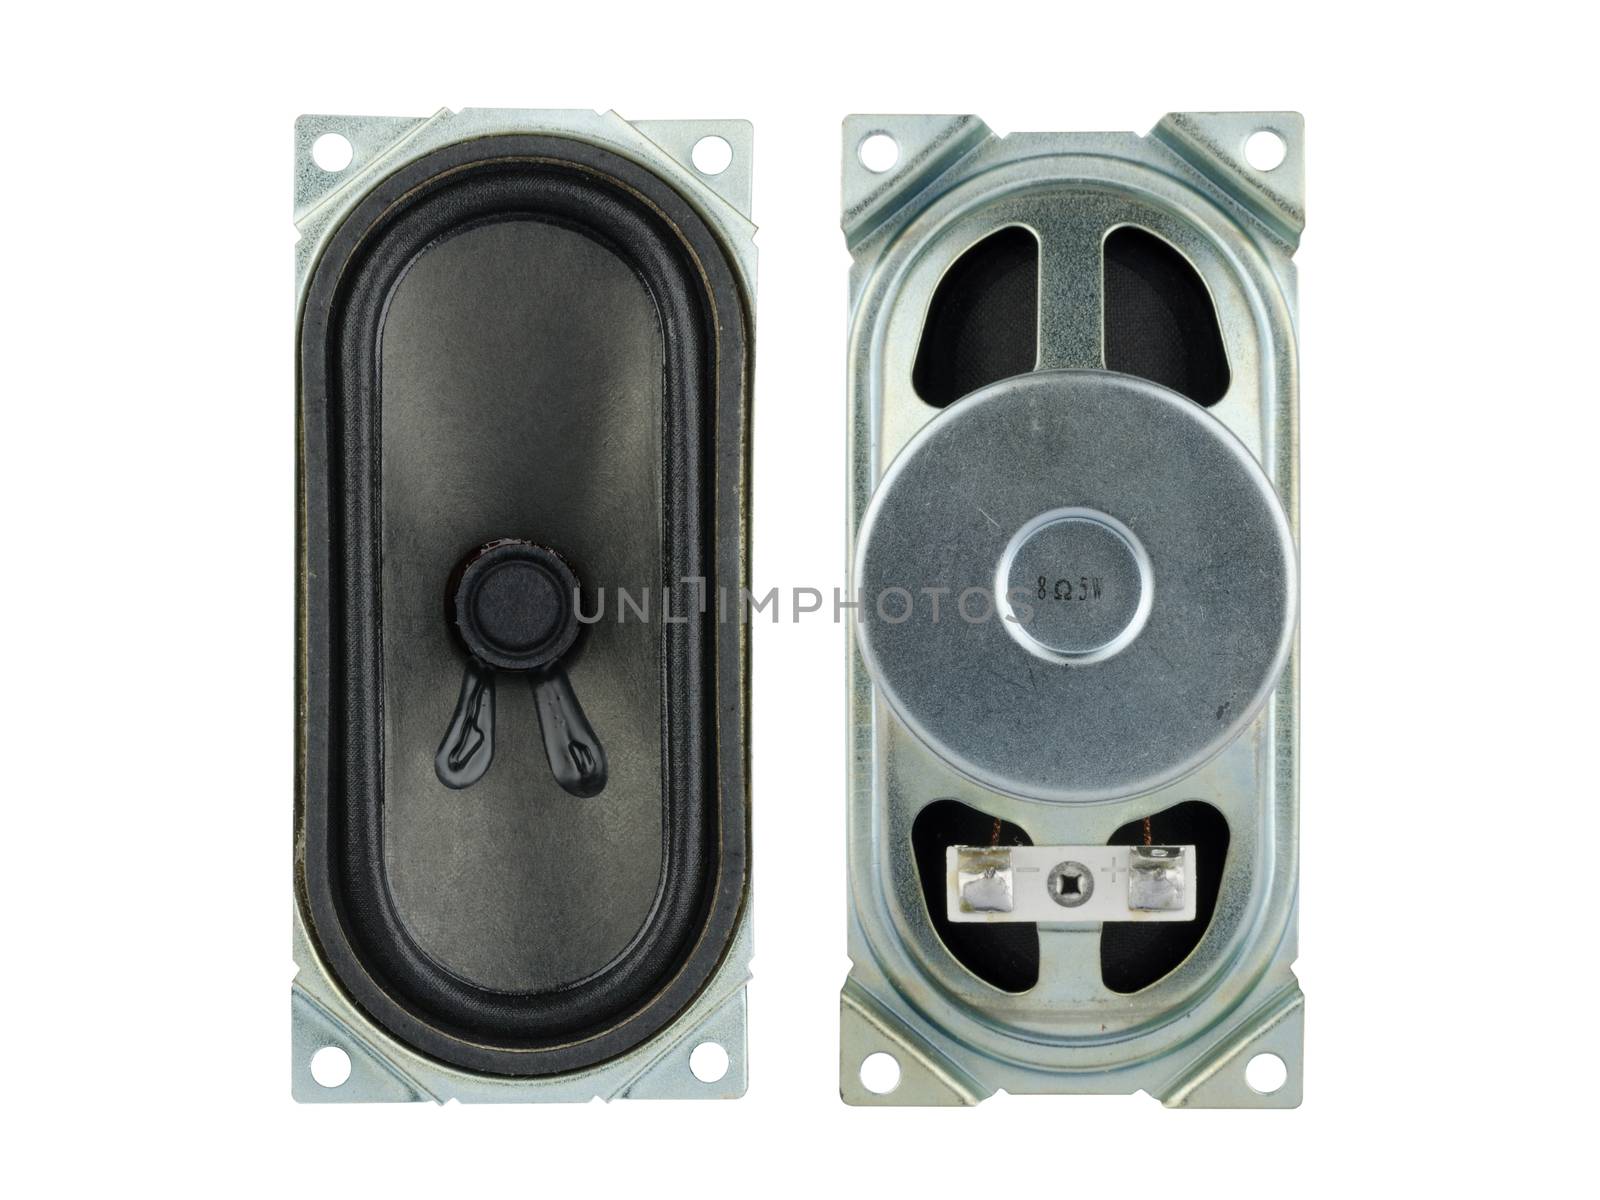 speaker is electronic spare parts for television isolate on white background.